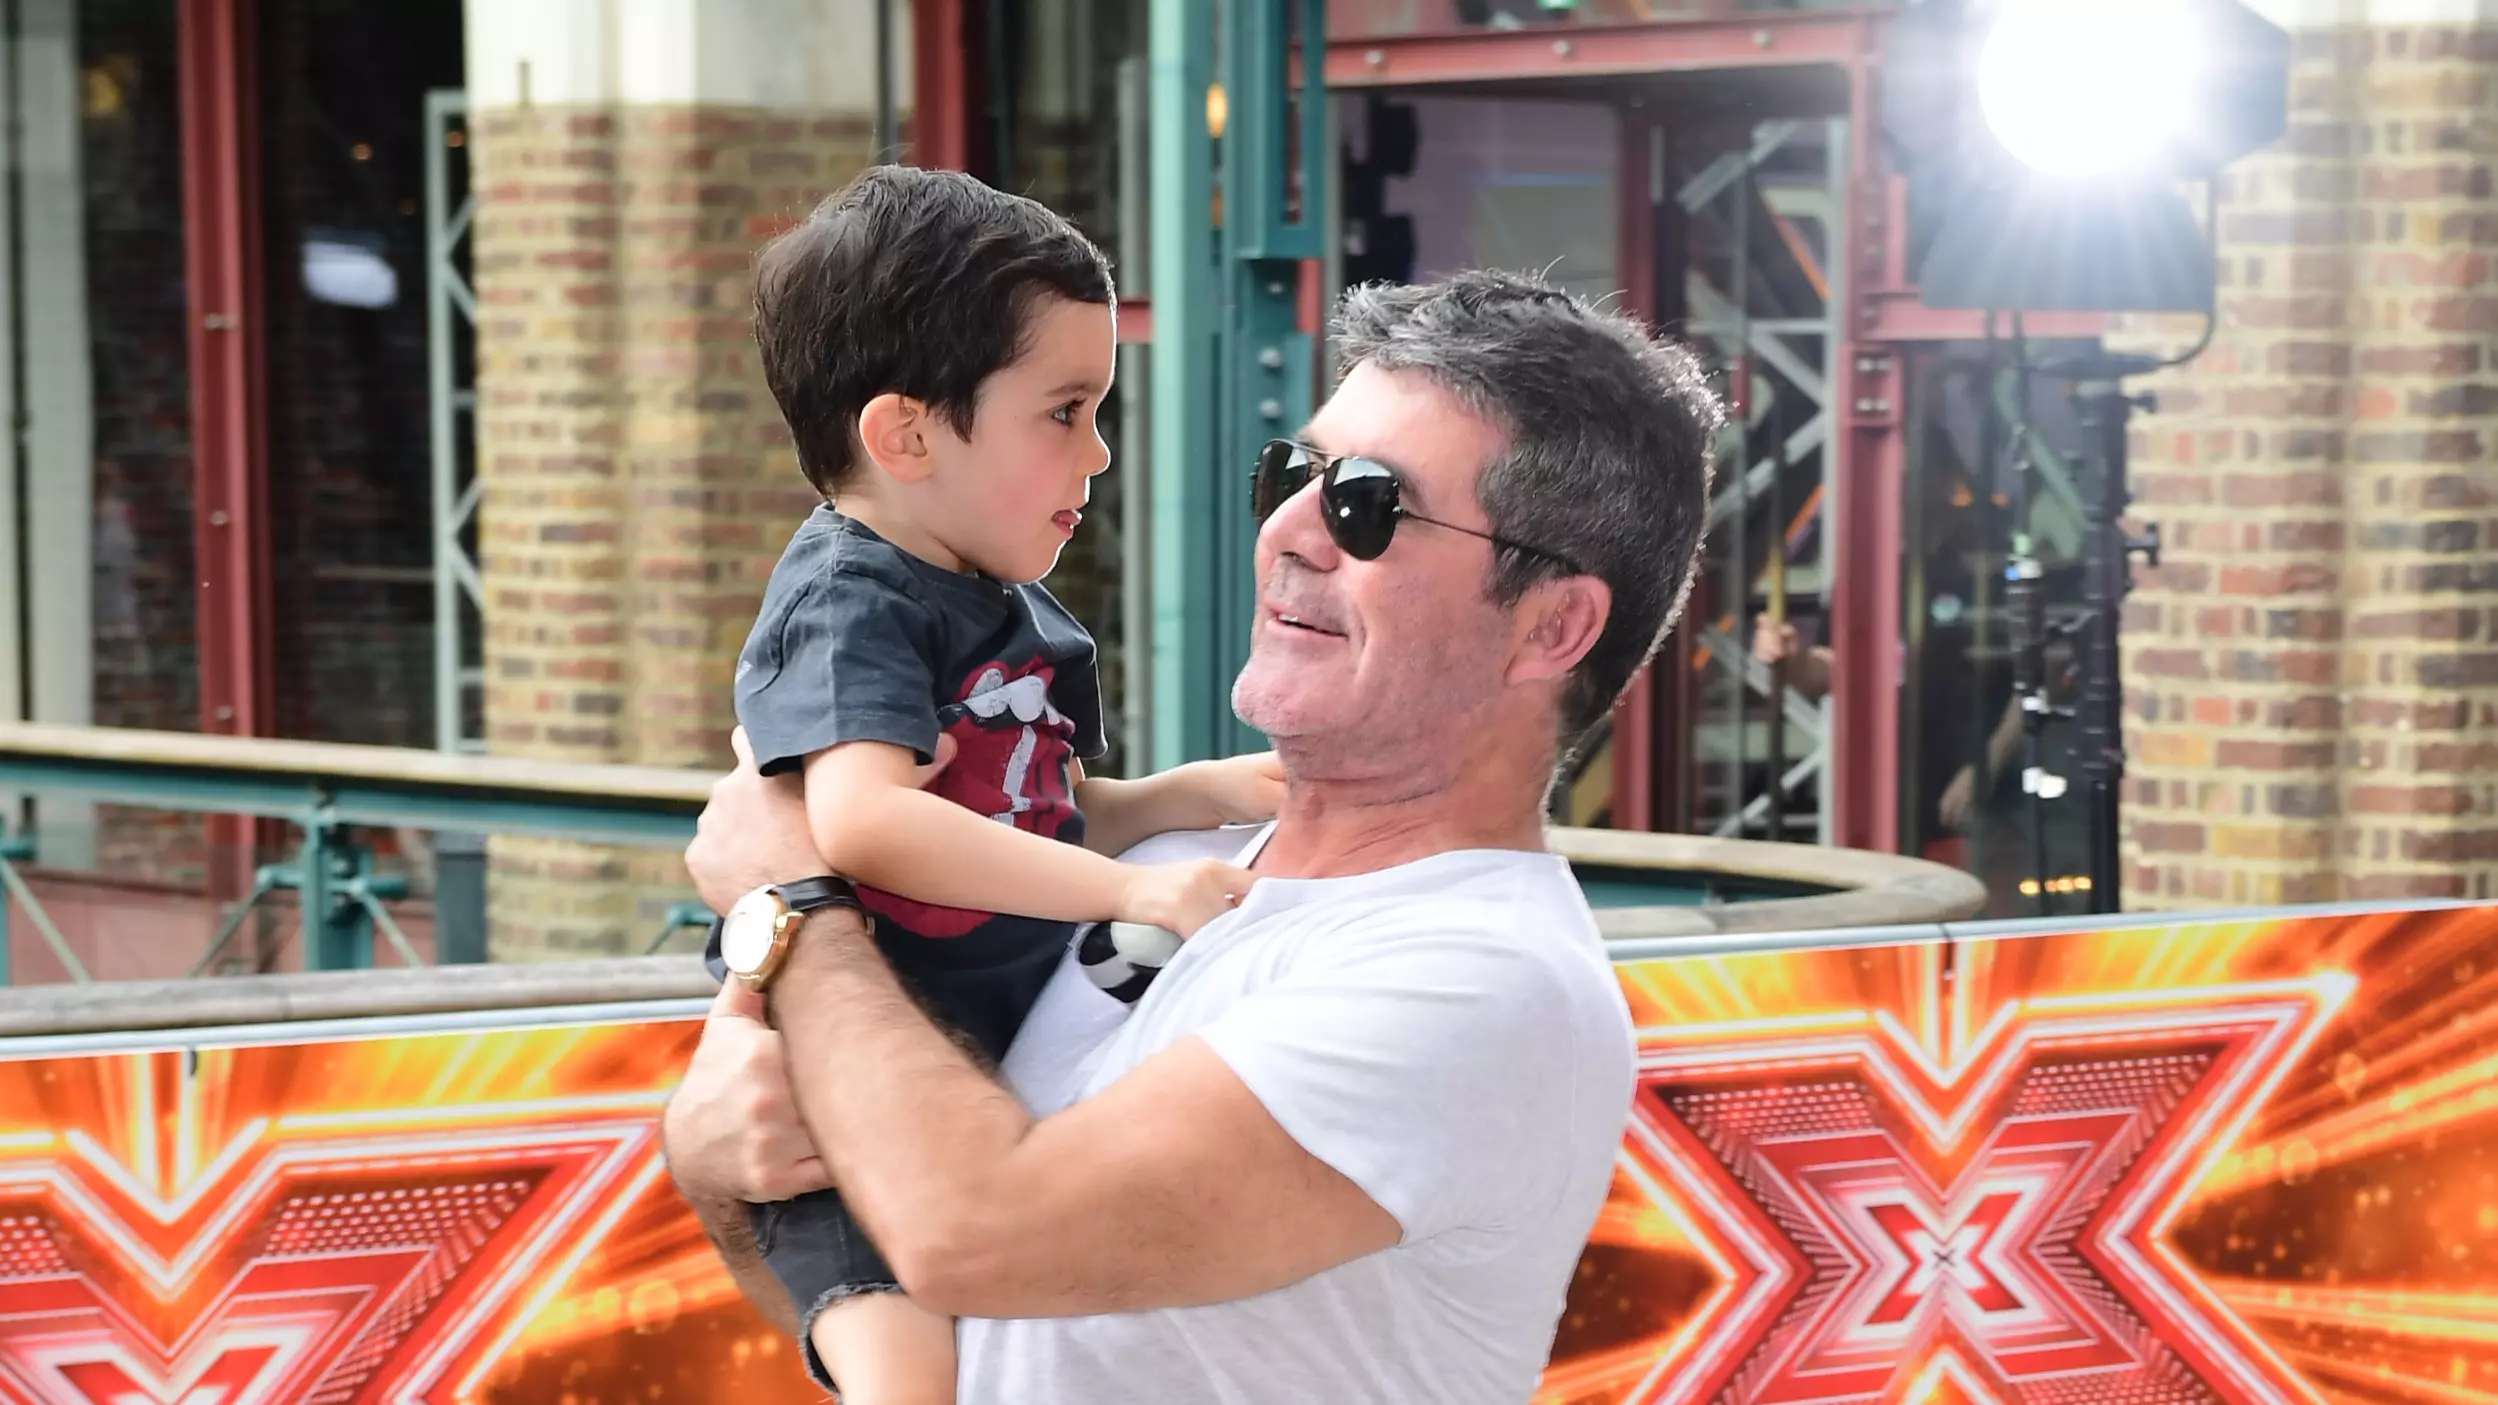 Simon Cowell Wants To Take His Son Out Of School Aged 10